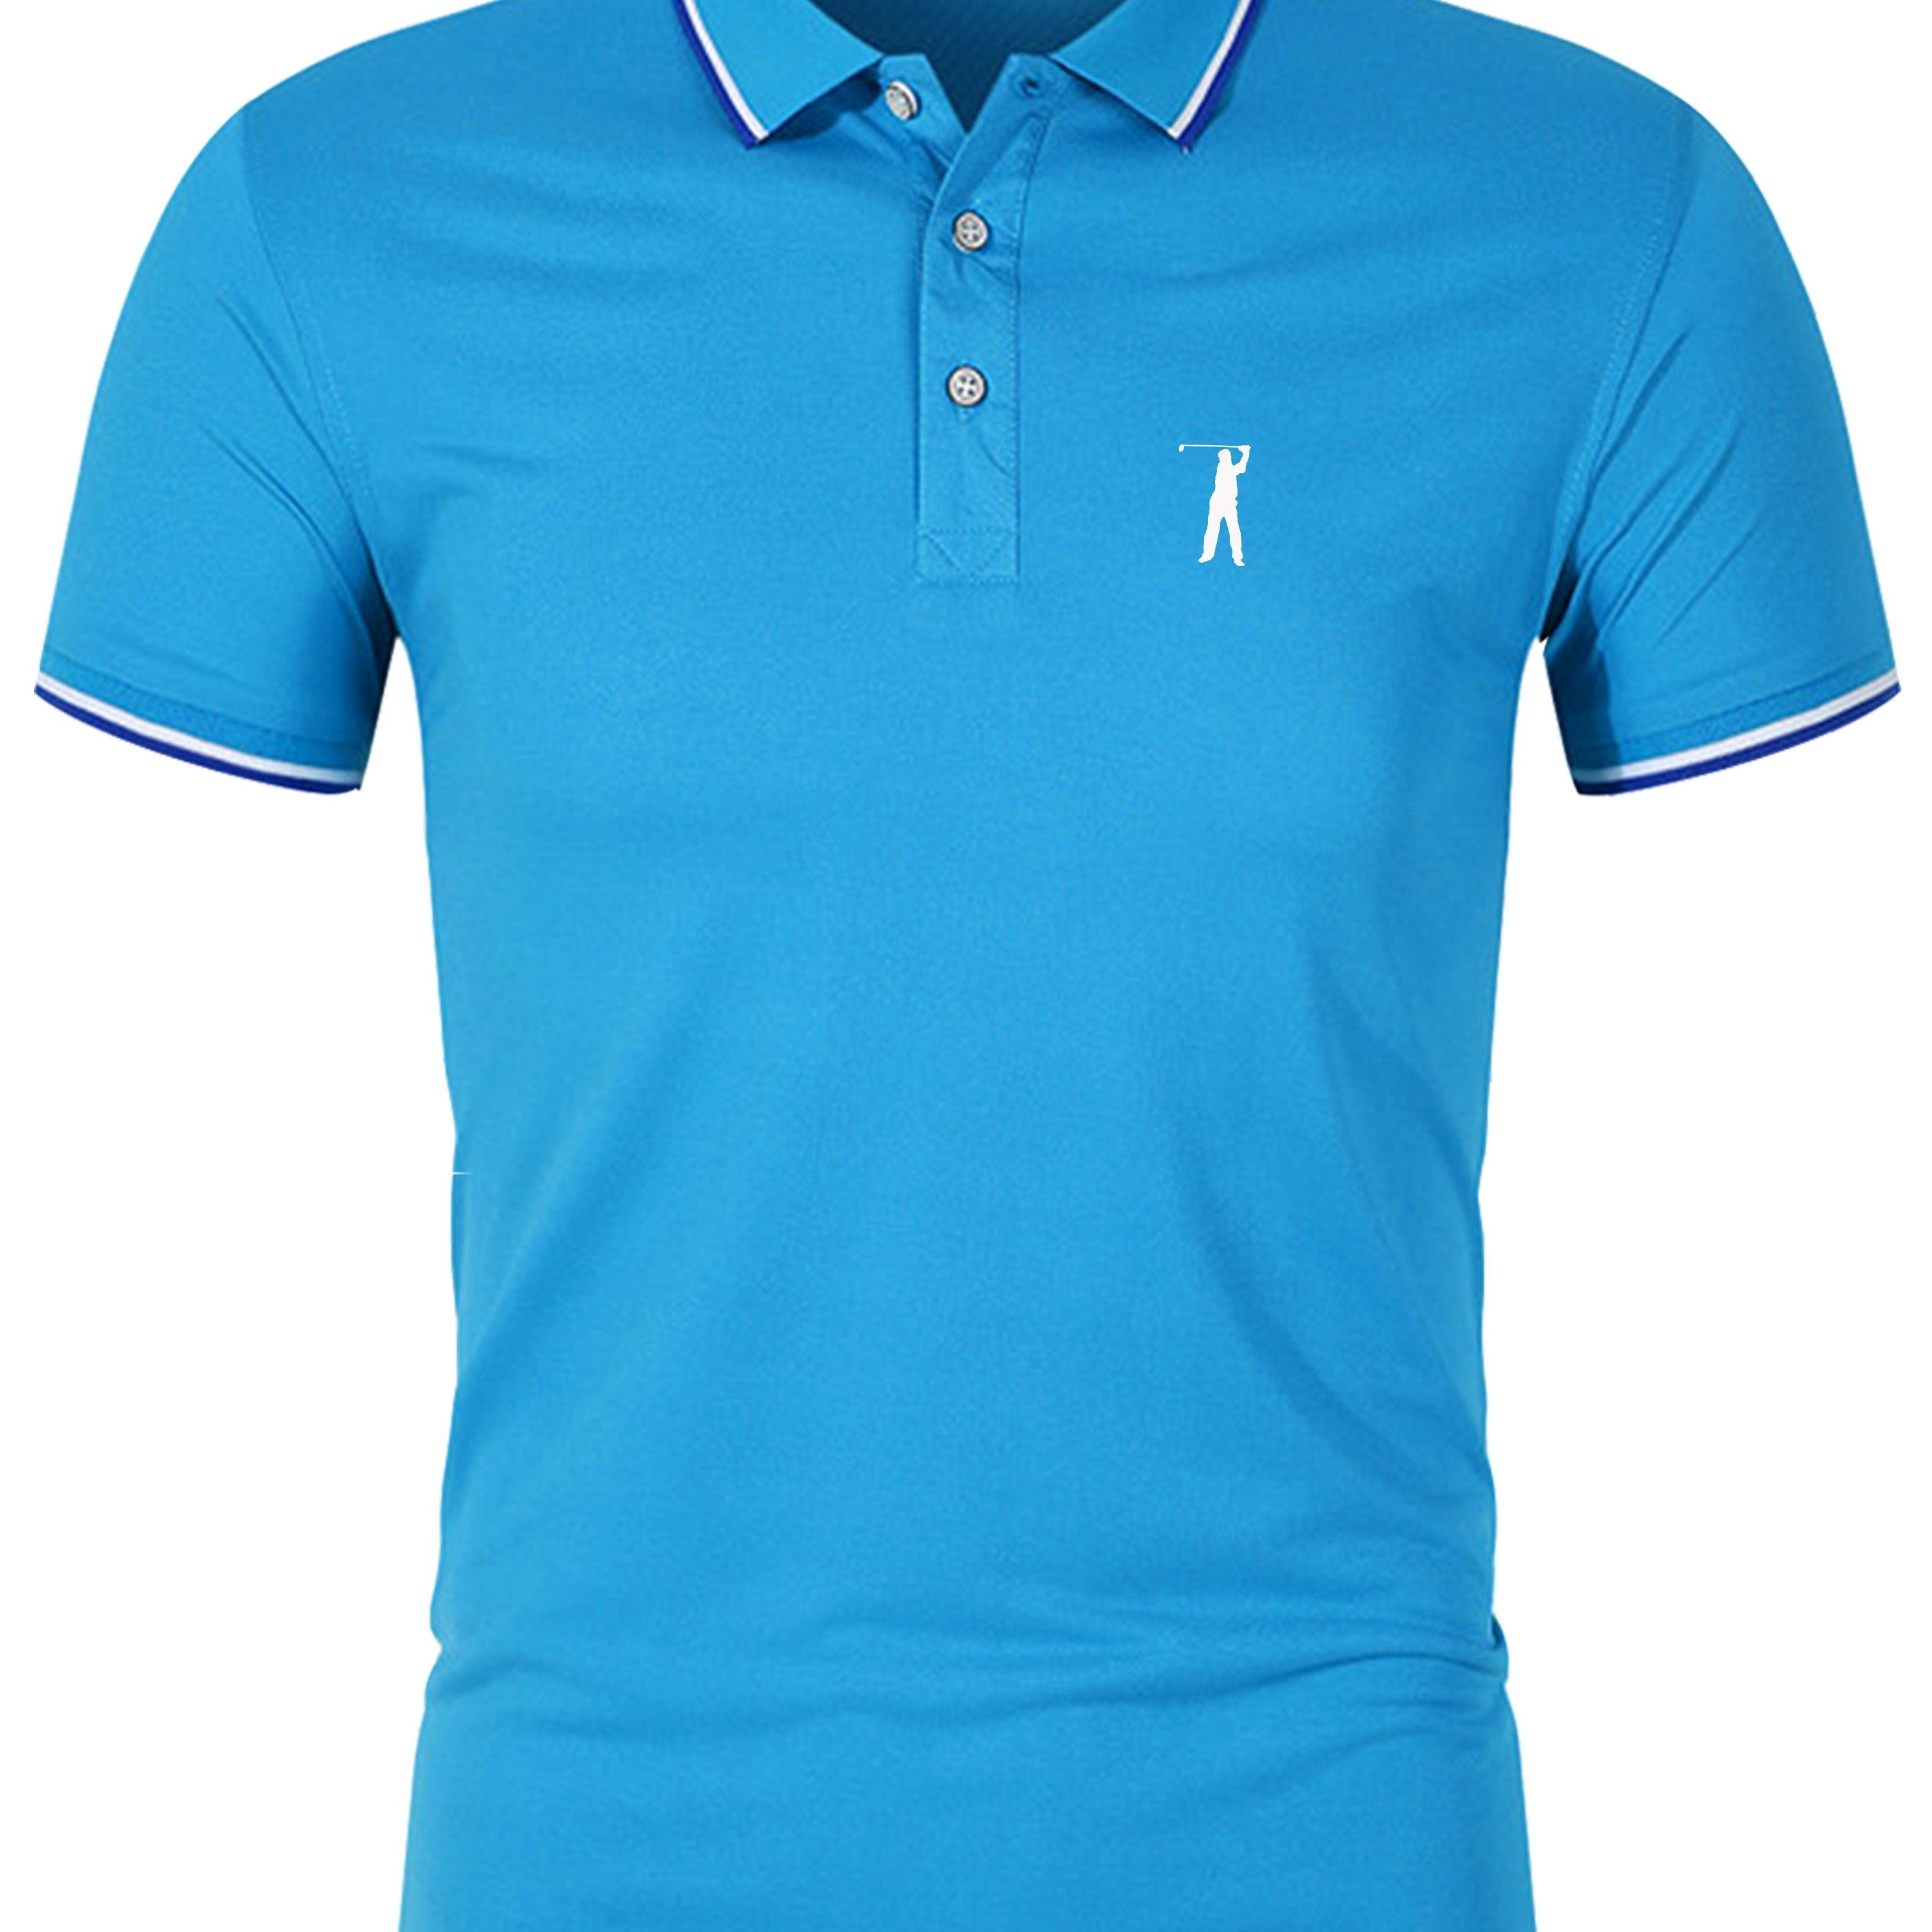 

Men's Quick-dry Golf Polo Shirt - Stay Cool And Comfortable On The Course With This Golfing Man Print Shirt